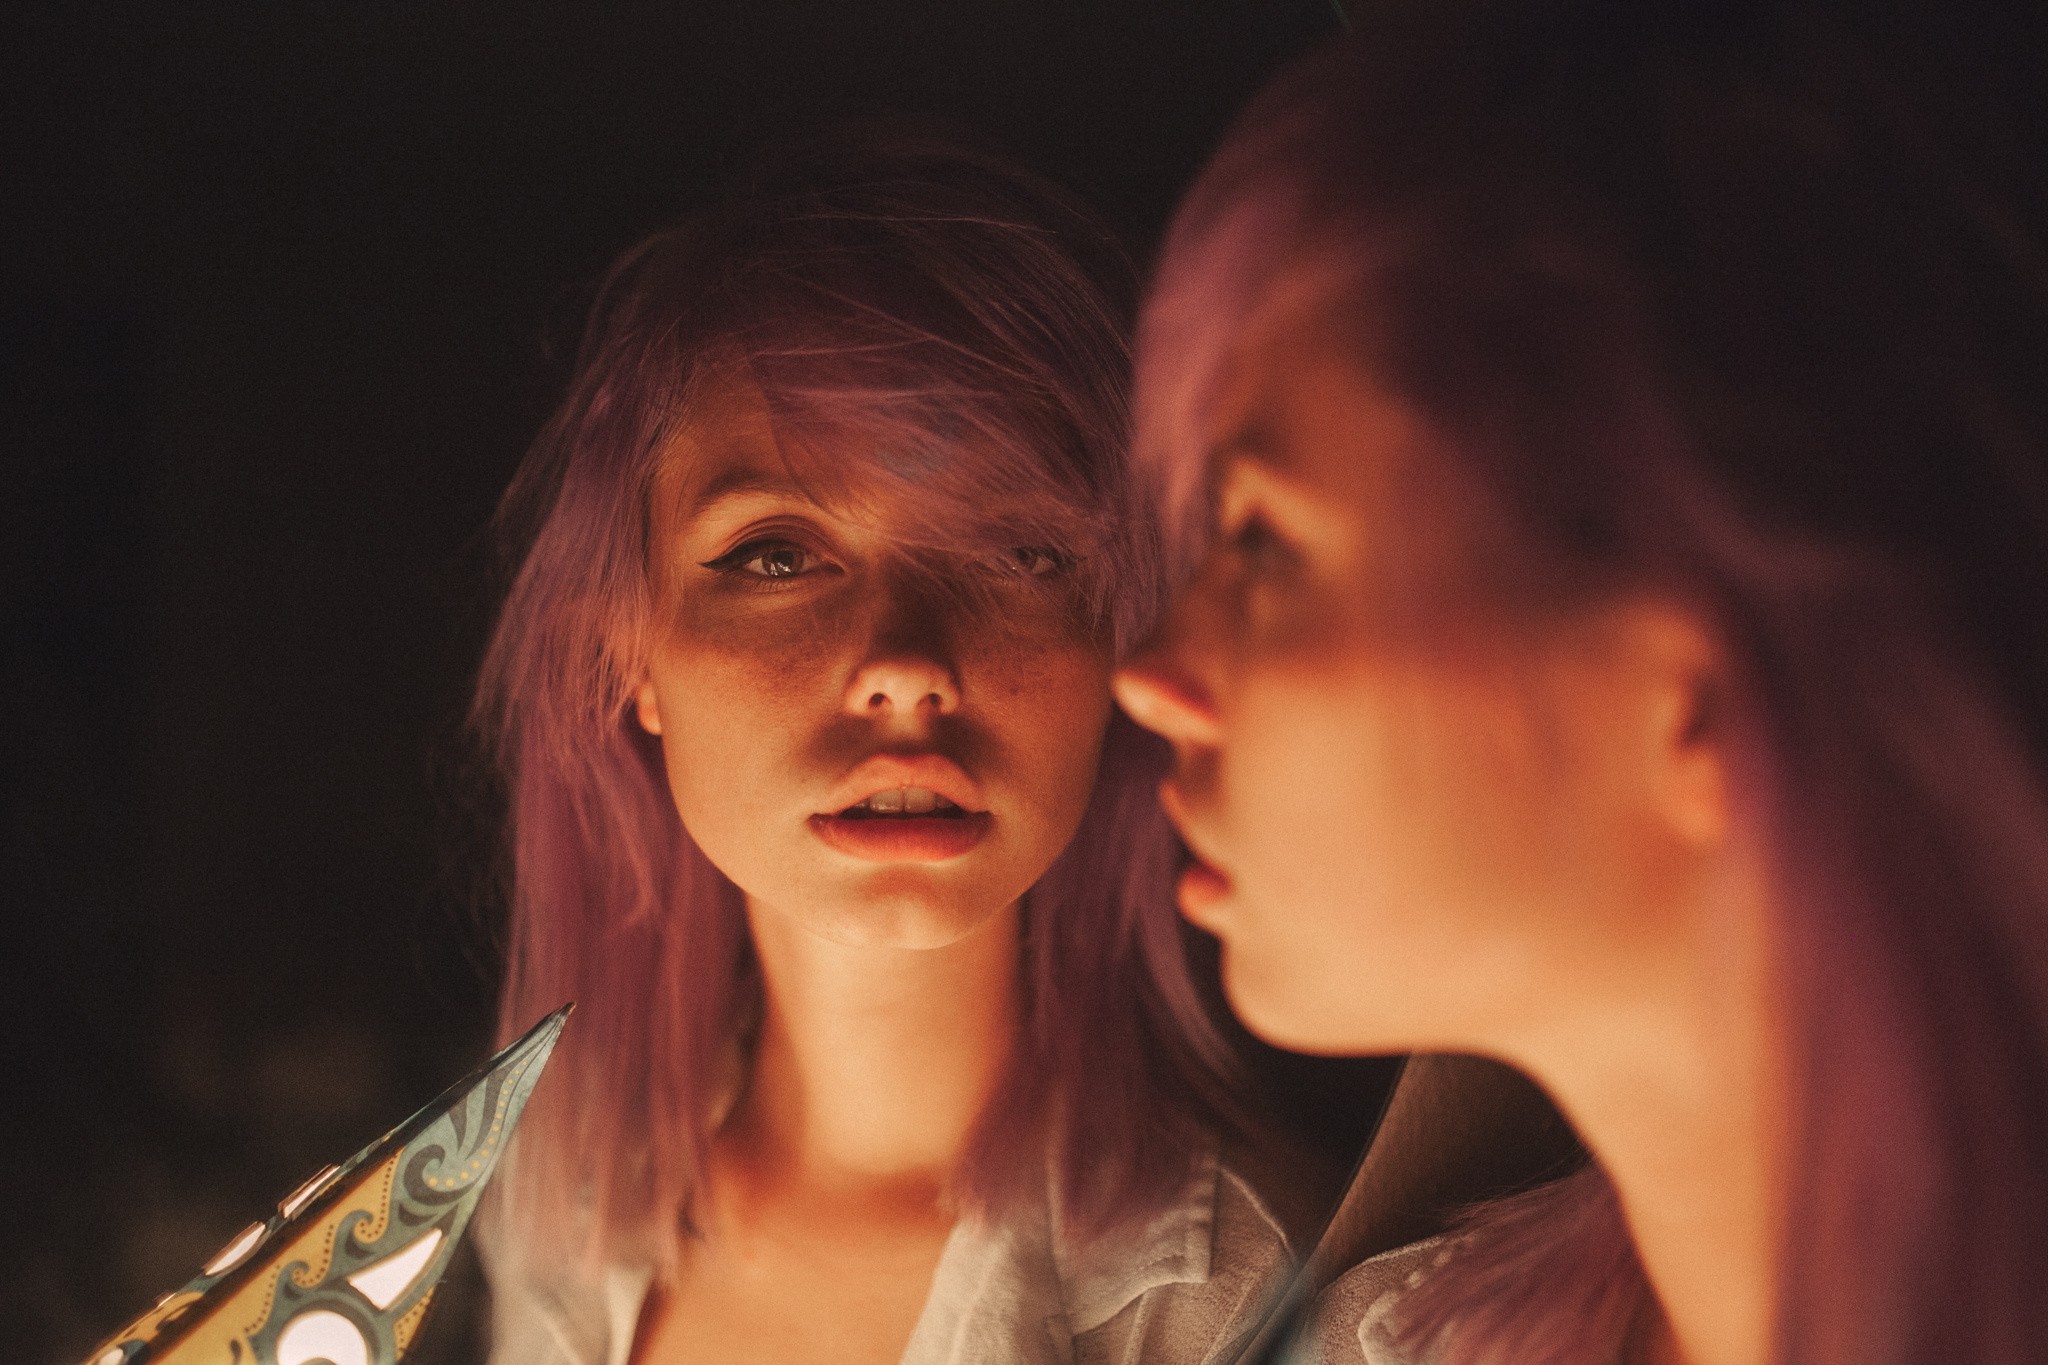 Women Face Portrait Dyed Hair Reflection Ruby James Skye Thompson Women Skye Thompson Ruby James Fre 2048x1365